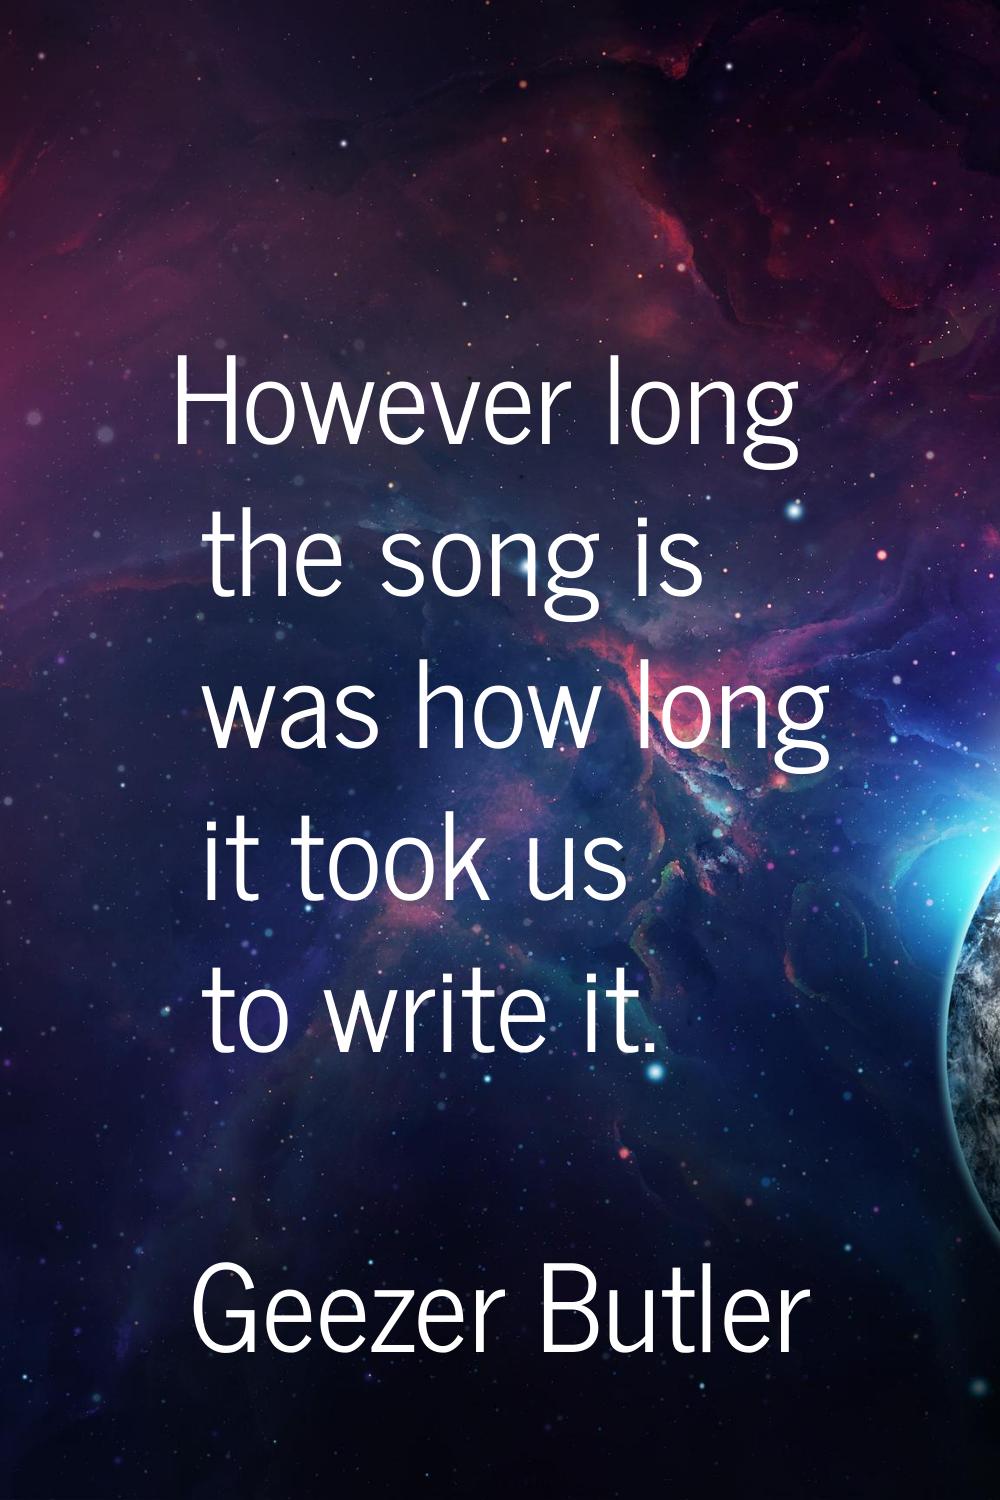 However long the song is was how long it took us to write it.